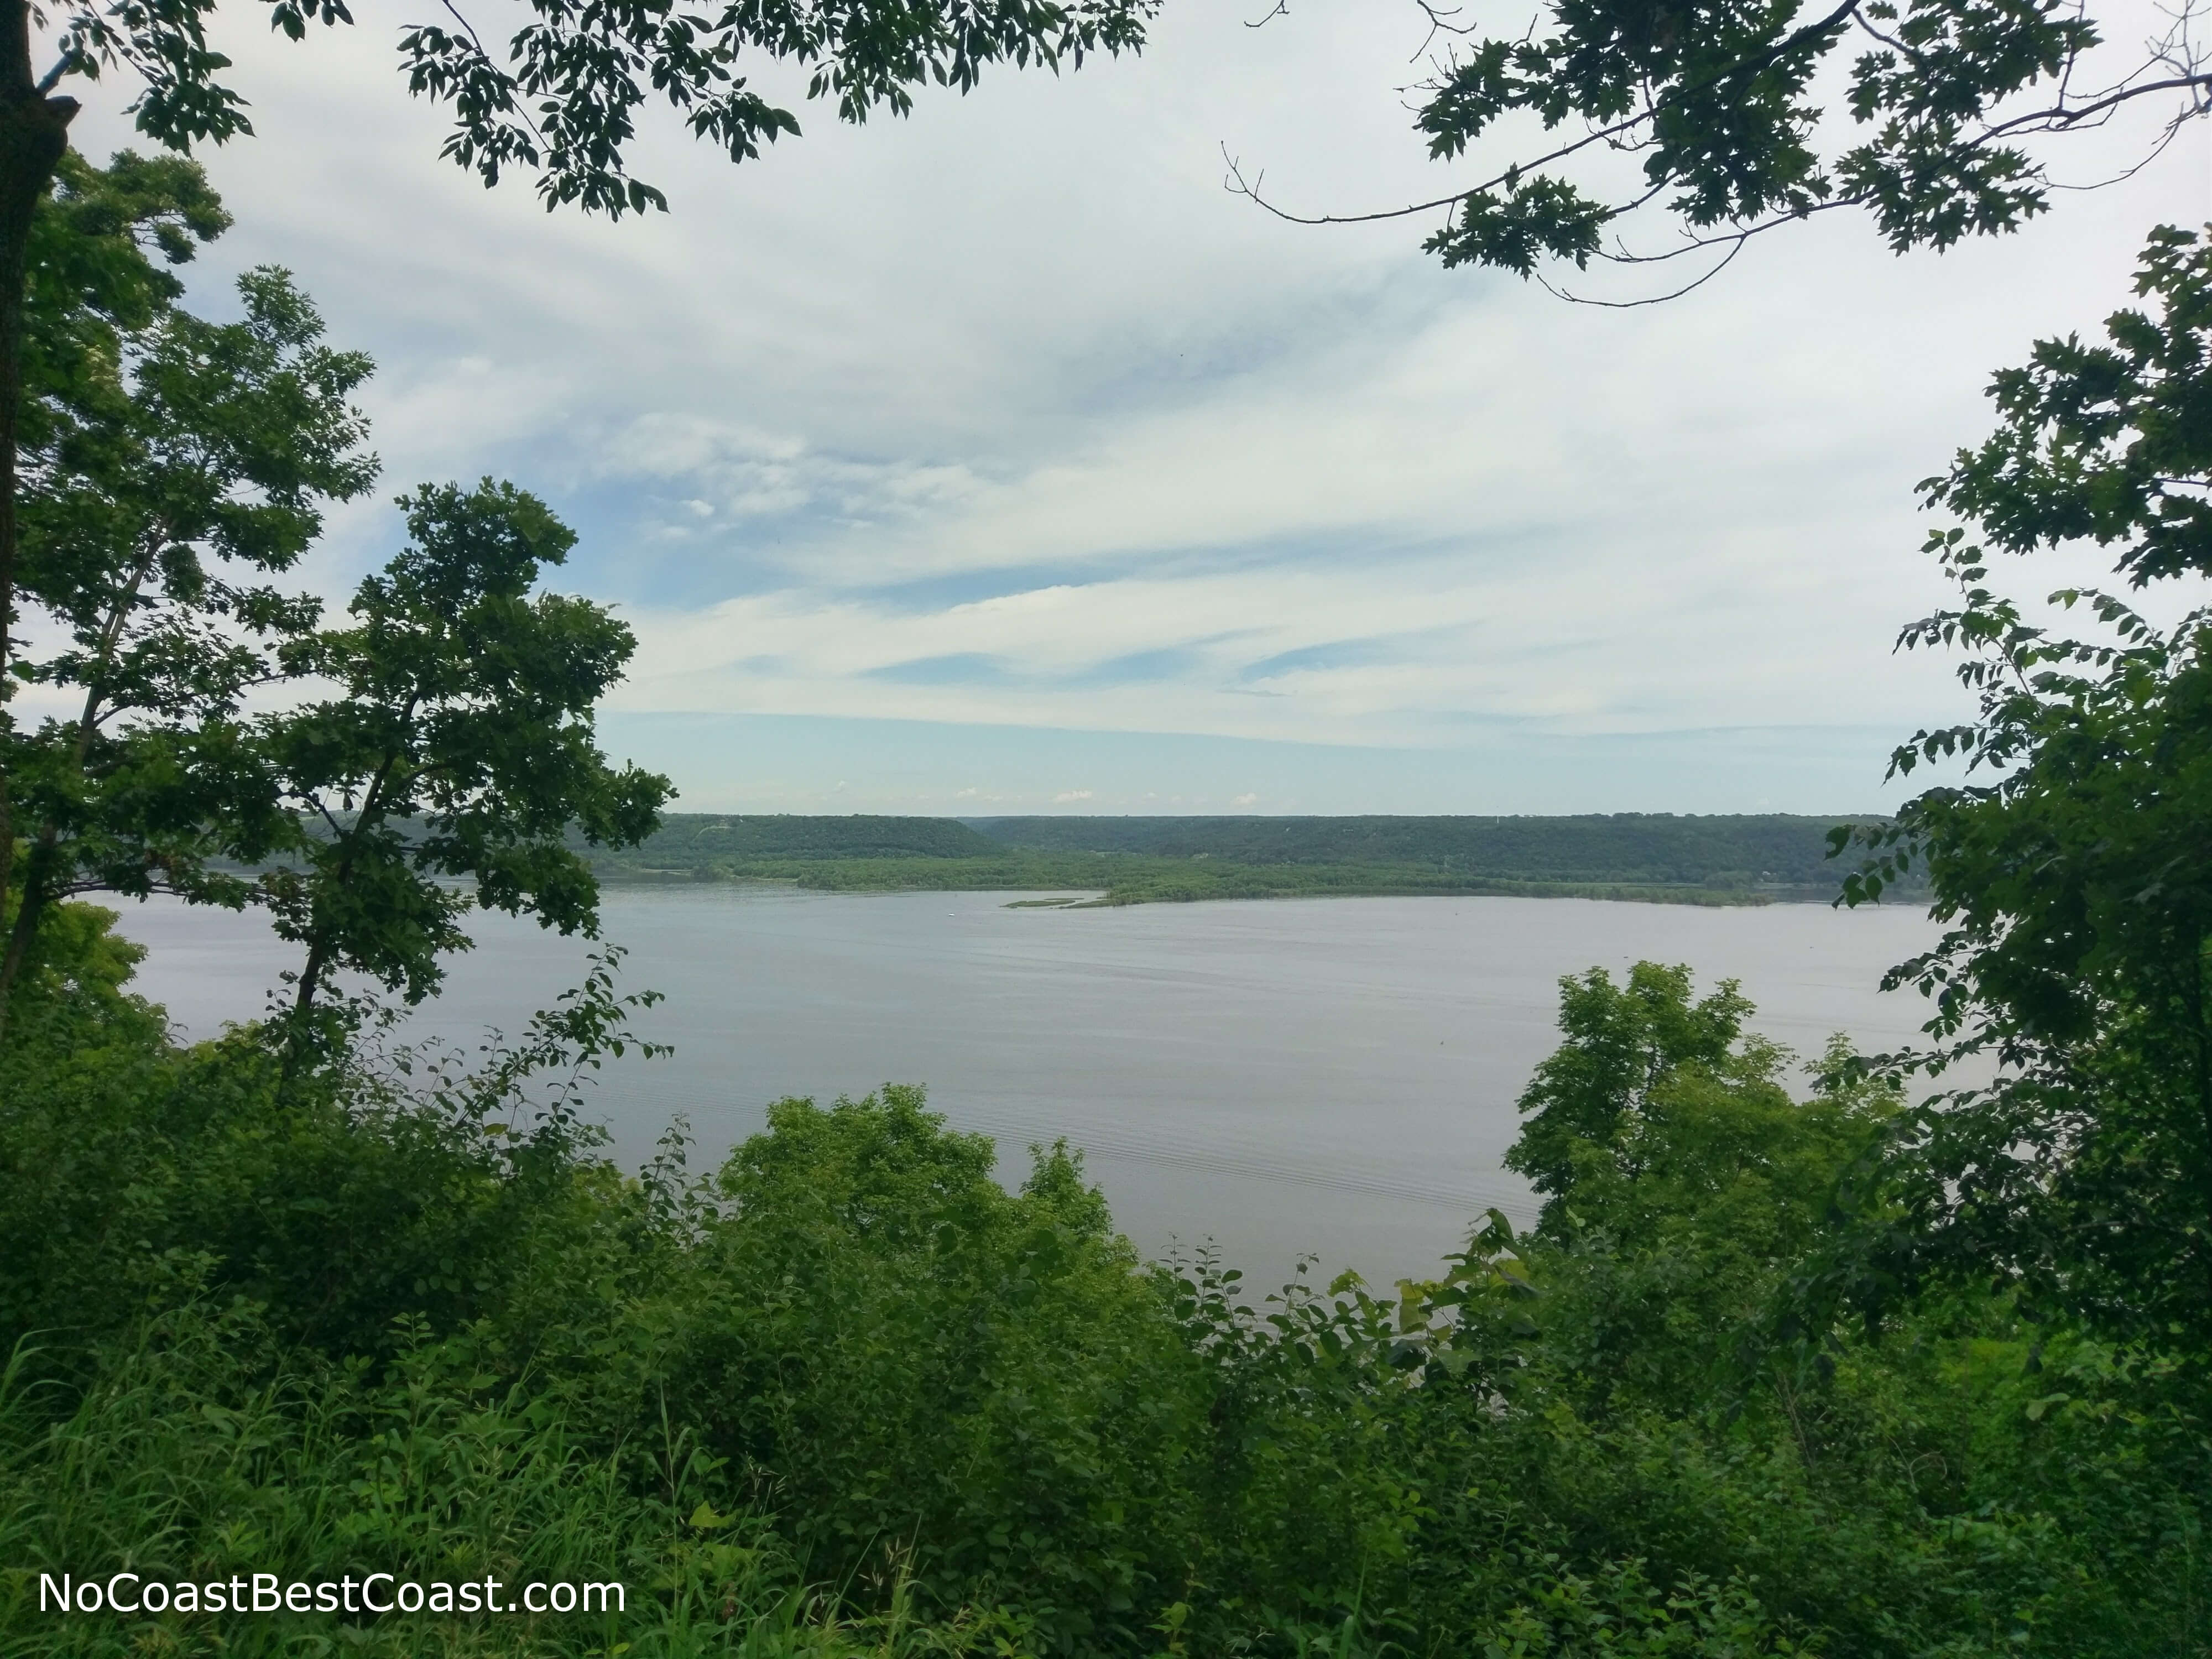 View of the Mississippi from one of the overlooks